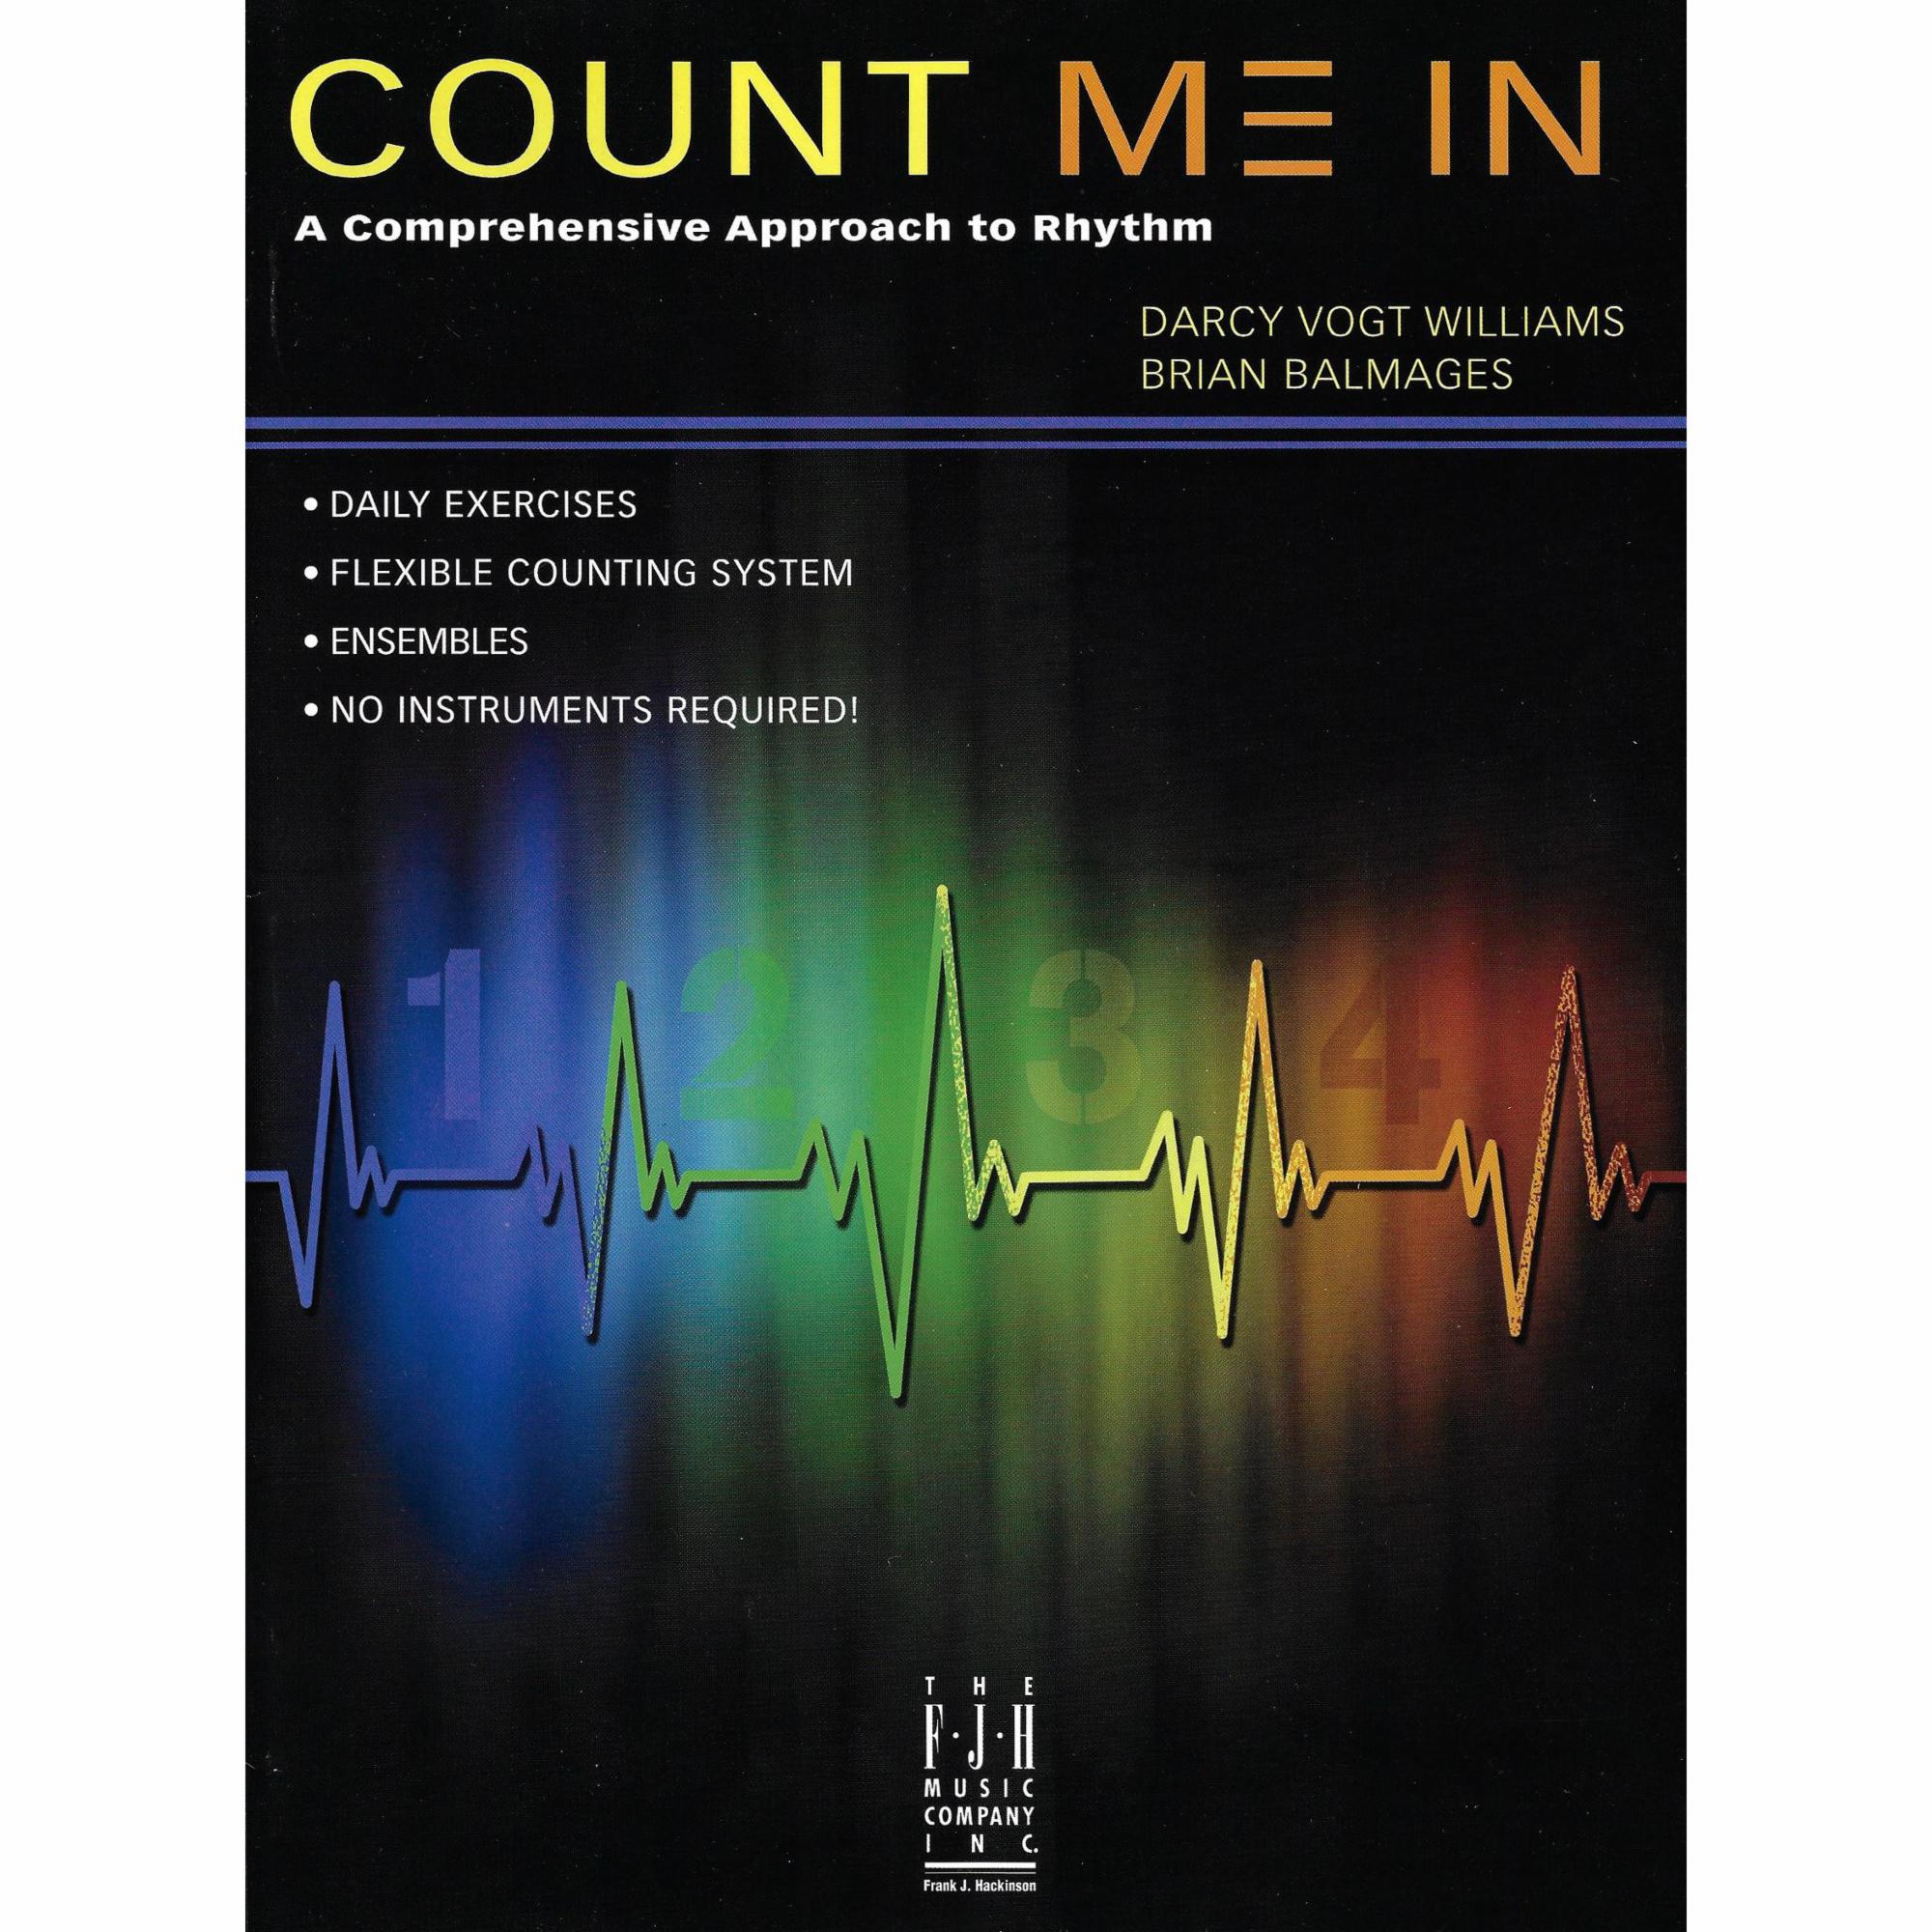 Count Me In: A Comprehensive Approach to Rhythm